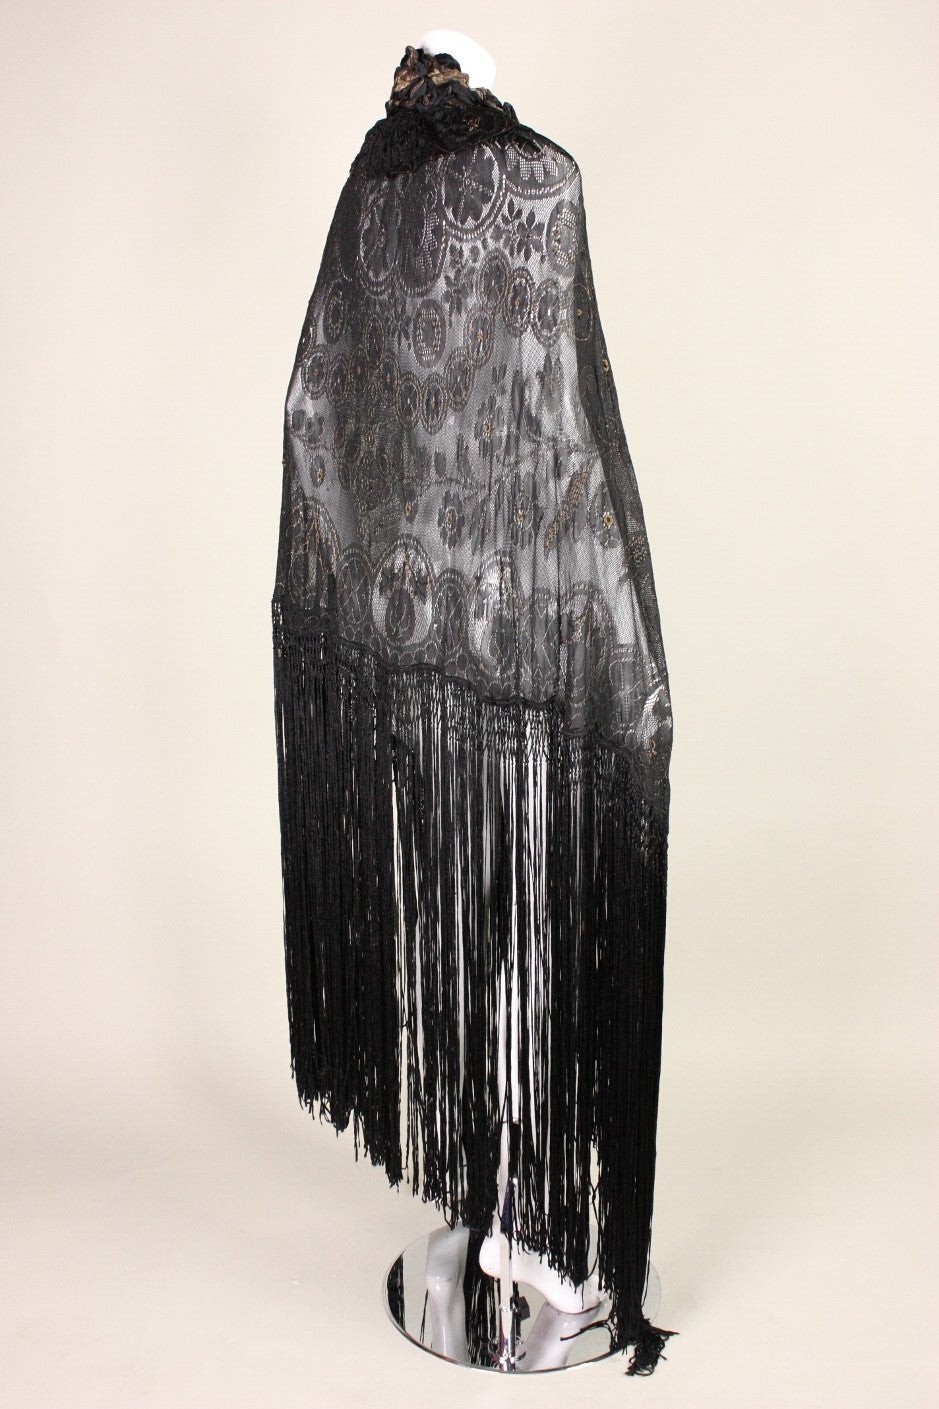 Women's 1920's Fringed Lace & Lame Cape